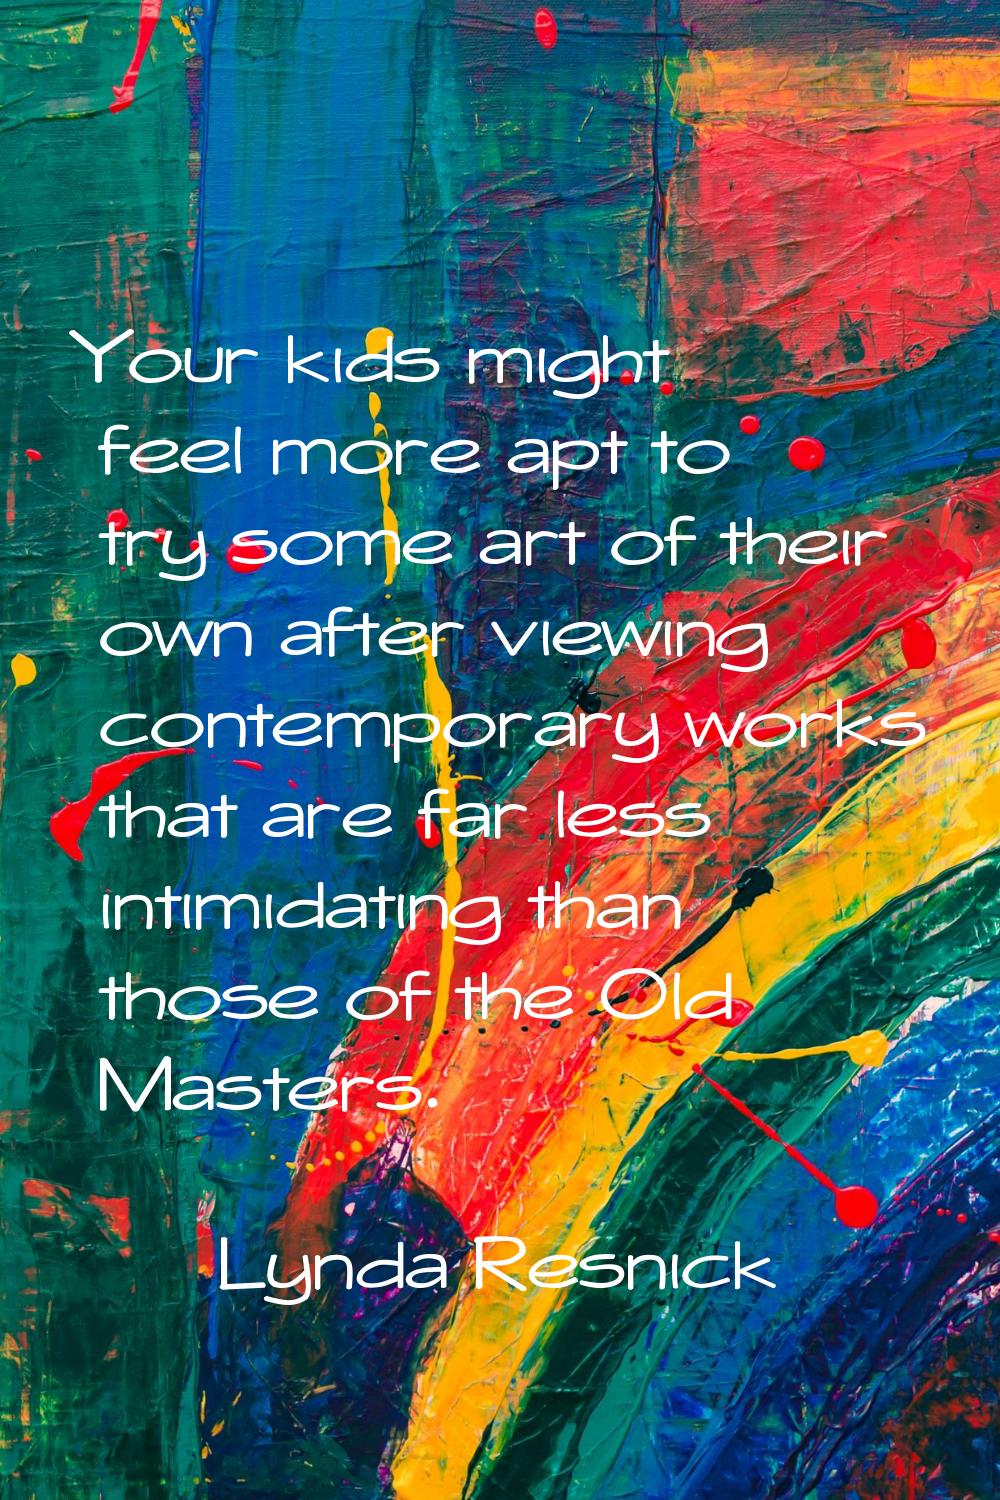 Your kids might feel more apt to try some art of their own after viewing contemporary works that ar